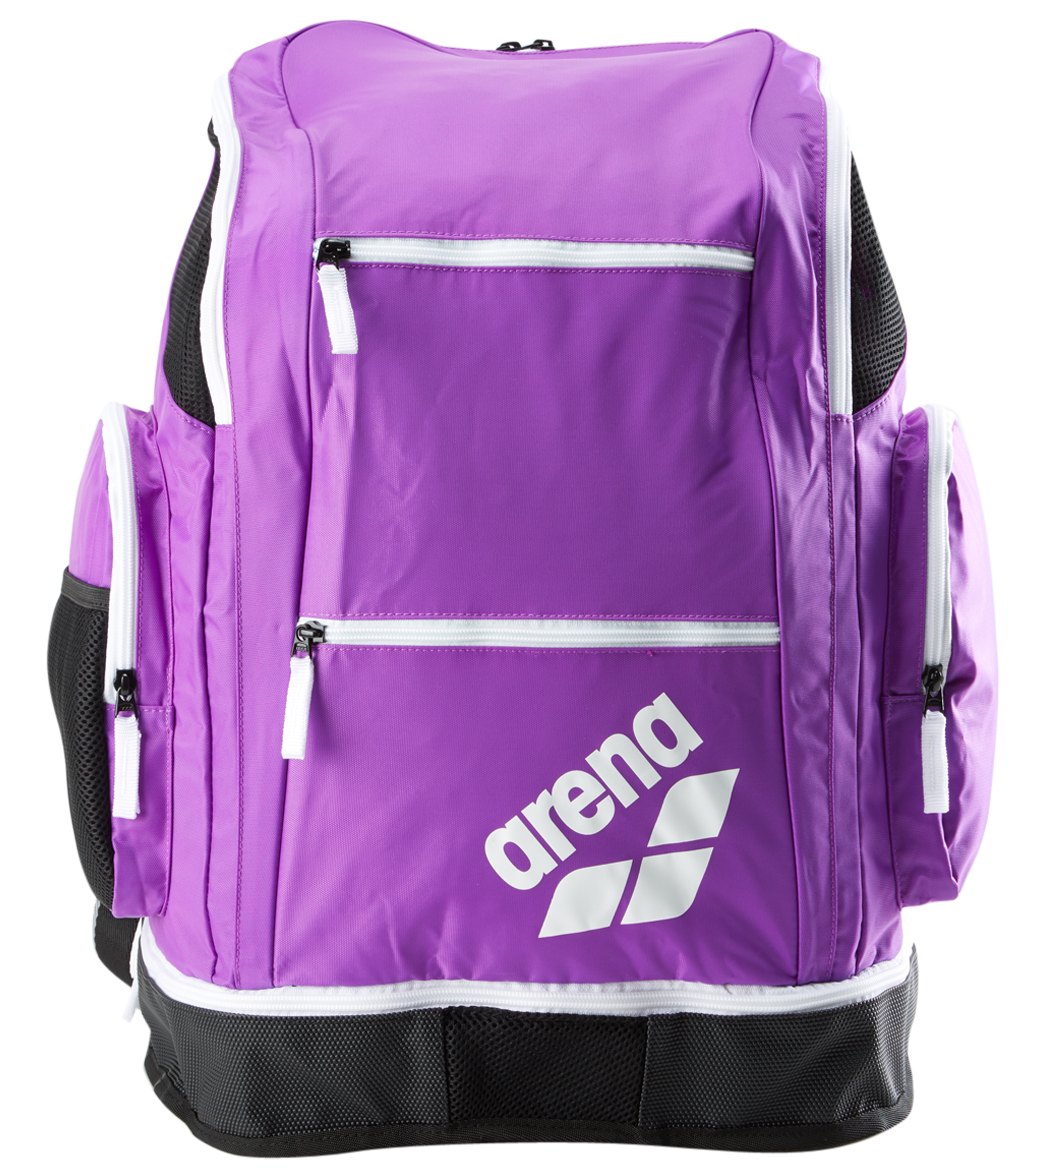 Arena Solid Spiky 2 Large Backpack at SwimOutlet.com